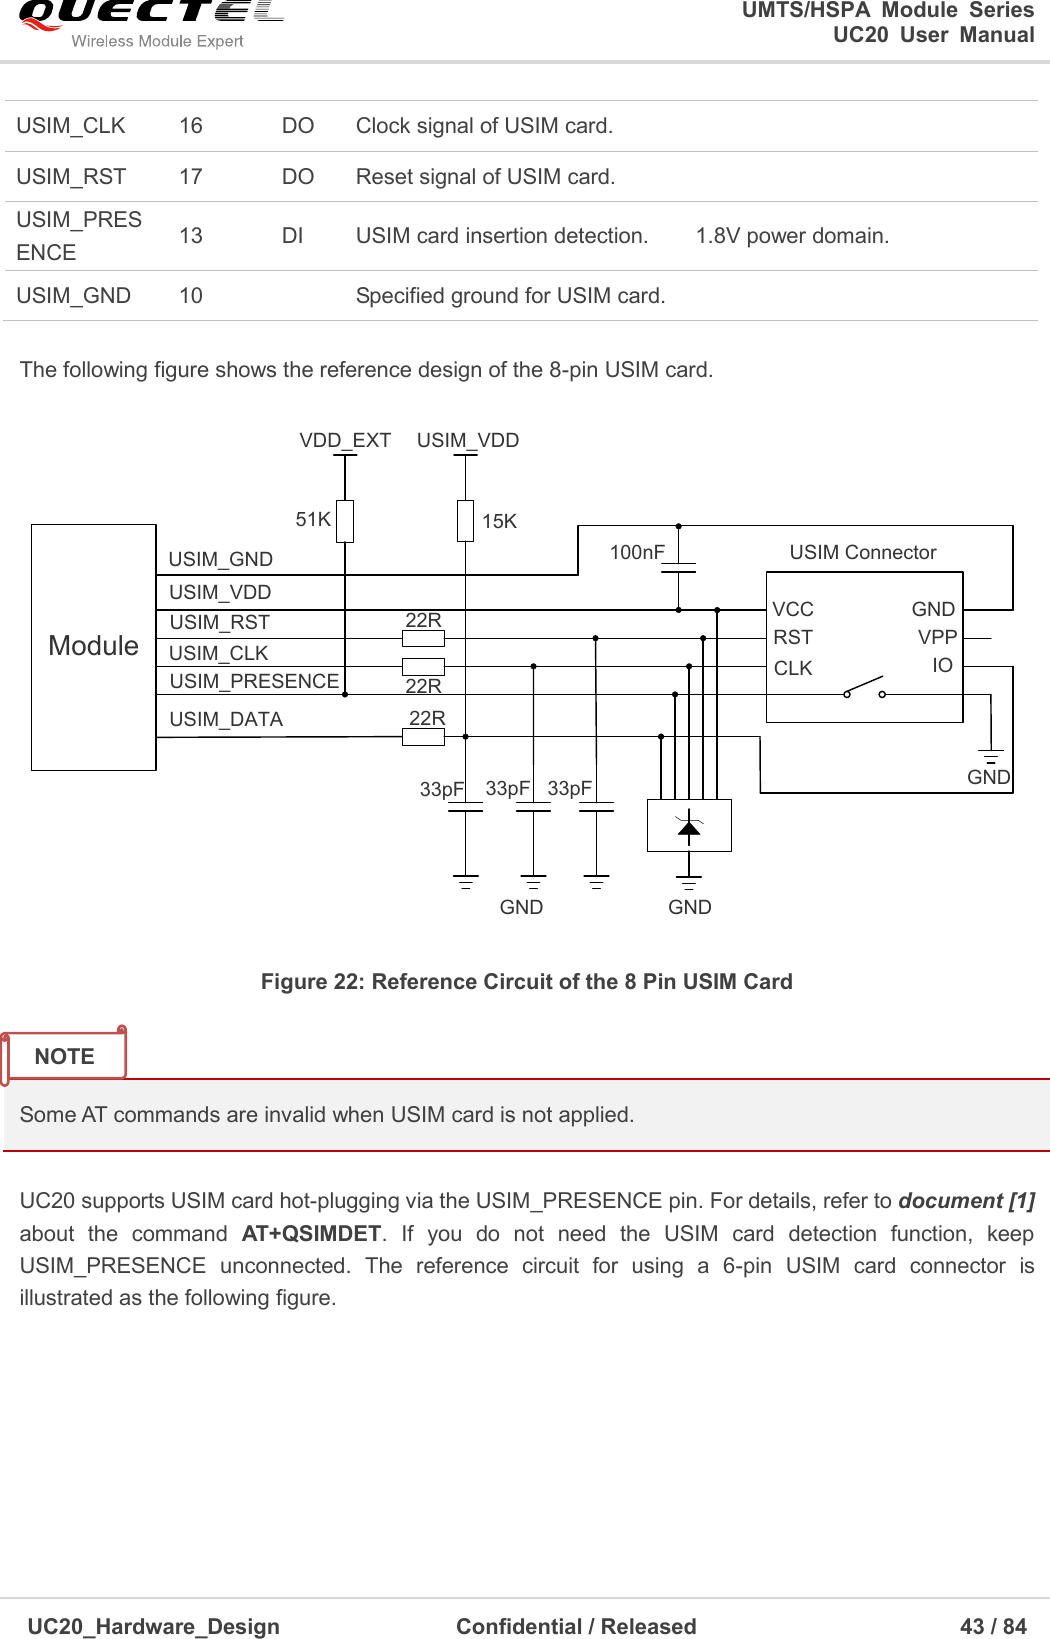                                                                                                                                               UMTS/HSPA  Module  Series                                                                 UC20  User  Manual  UC20_Hardware_Design                  Confidential / Released                            43 / 84     USIM_CLK 16 DO Clock signal of USIM card.  USIM_RST 17 DO Reset signal of USIM card.  USIM_PRESENCE 13 DI USIM card insertion detection. 1.8V power domain. USIM_GND 10  Specified ground for USIM card.   The following figure shows the reference design of the 8-pin USIM card. ModuleUSIM_VDDUSIM_GNDUSIM_RSTUSIM_CLKUSIM_DATAUSIM_PRESENCE22R22R22RVDD_EXT51K100nF USIM ConnectorGNDGND33pF 33pF 33pFVCCRSTCLK IOVPPGNDGNDUSIM_VDD15K Figure 22: Reference Circuit of the 8 Pin USIM Card  Some AT commands are invalid when USIM card is not applied.  UC20 supports USIM card hot-plugging via the USIM_PRESENCE pin. For details, refer to document [1] about  the  command  AT+QSIMDET.  If  you  do  not  need  the  USIM  card  detection  function,  keep USIM_PRESENCE  unconnected.  The  reference  circuit  for  using  a  6-pin  USIM  card  connector  is illustrated as the following figure. NOTE 